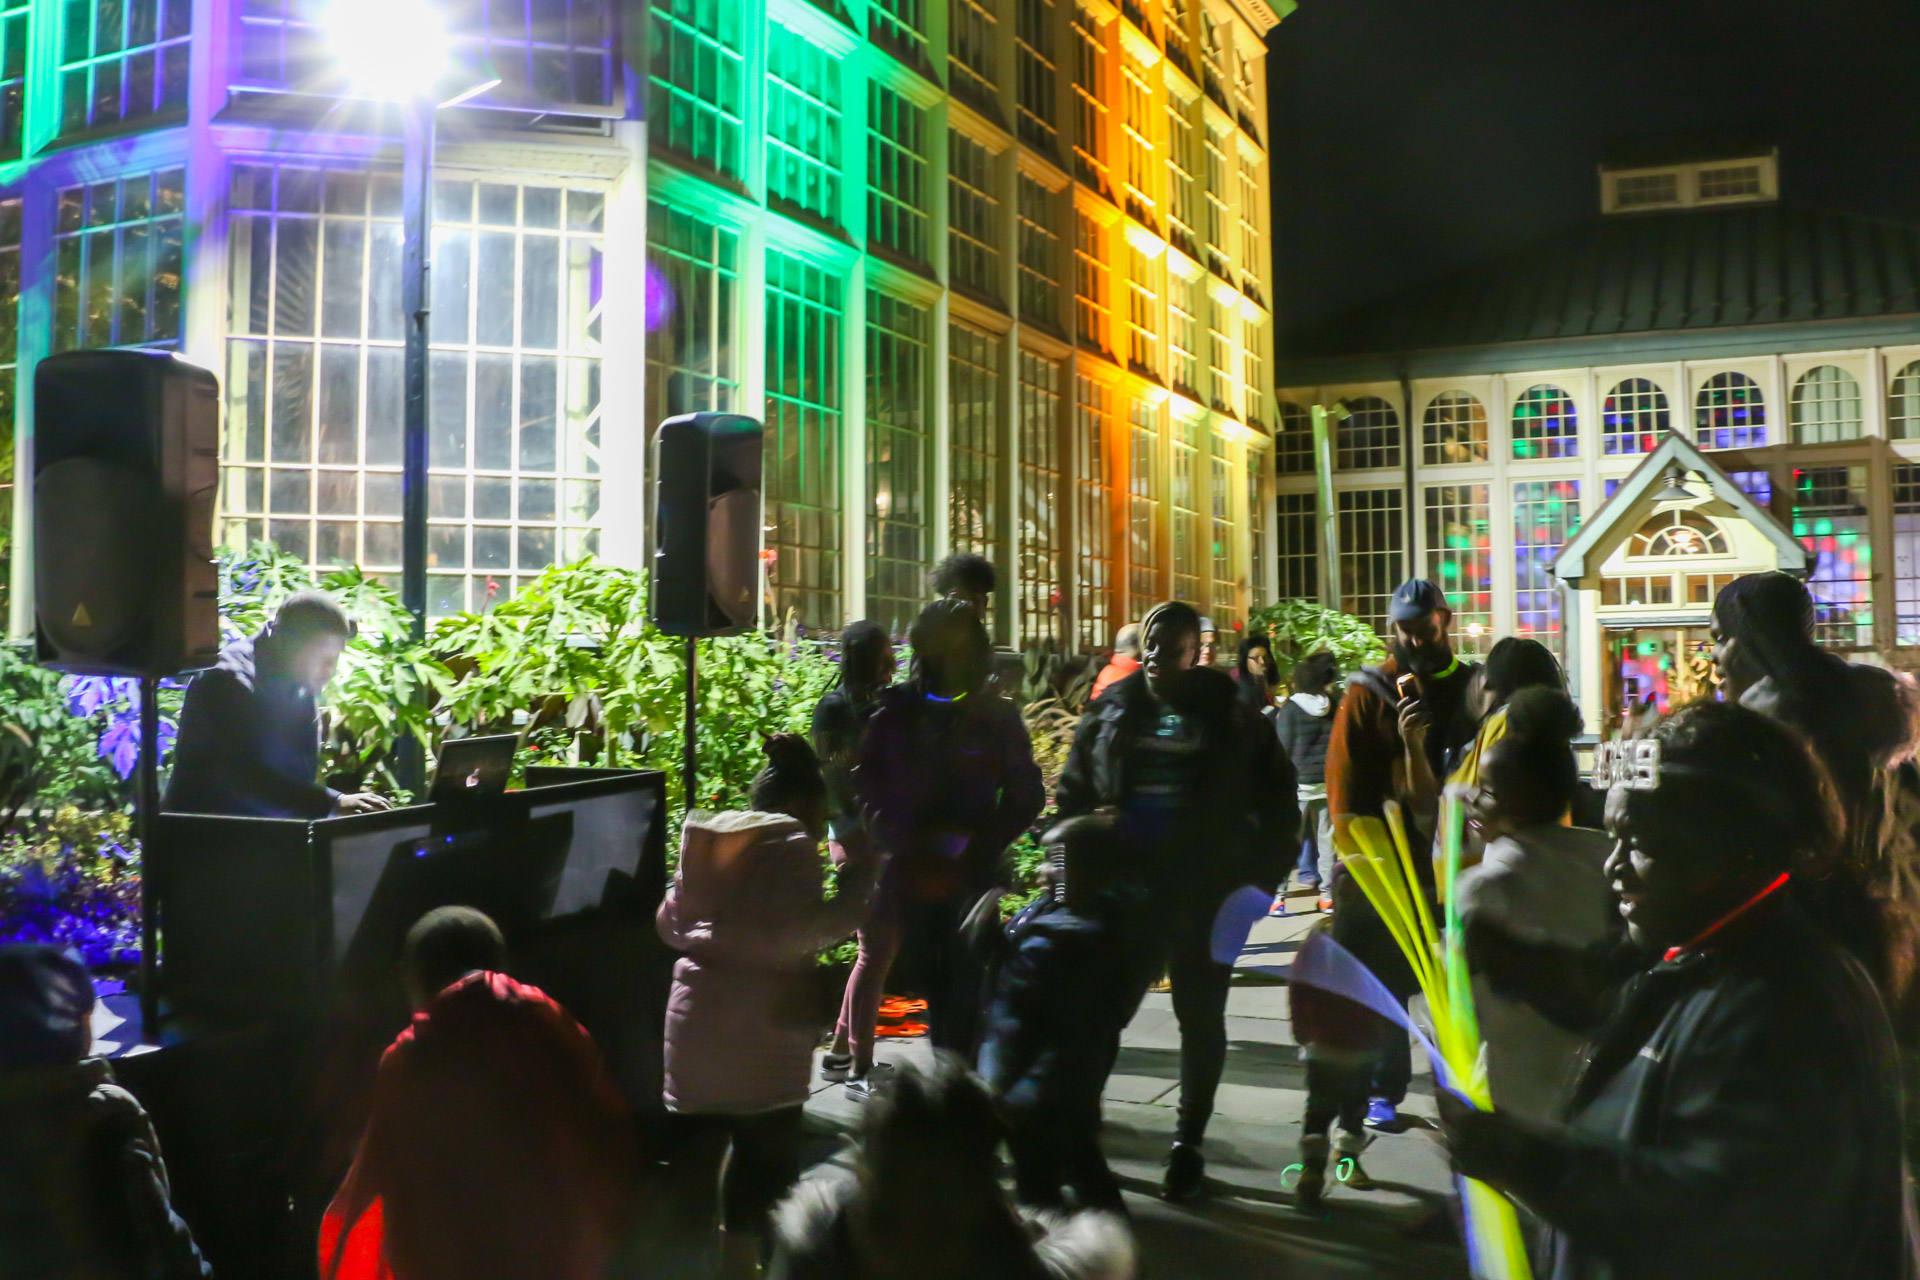 Arches & Access - dance party at Rawlings Conservatory illuminated with light art